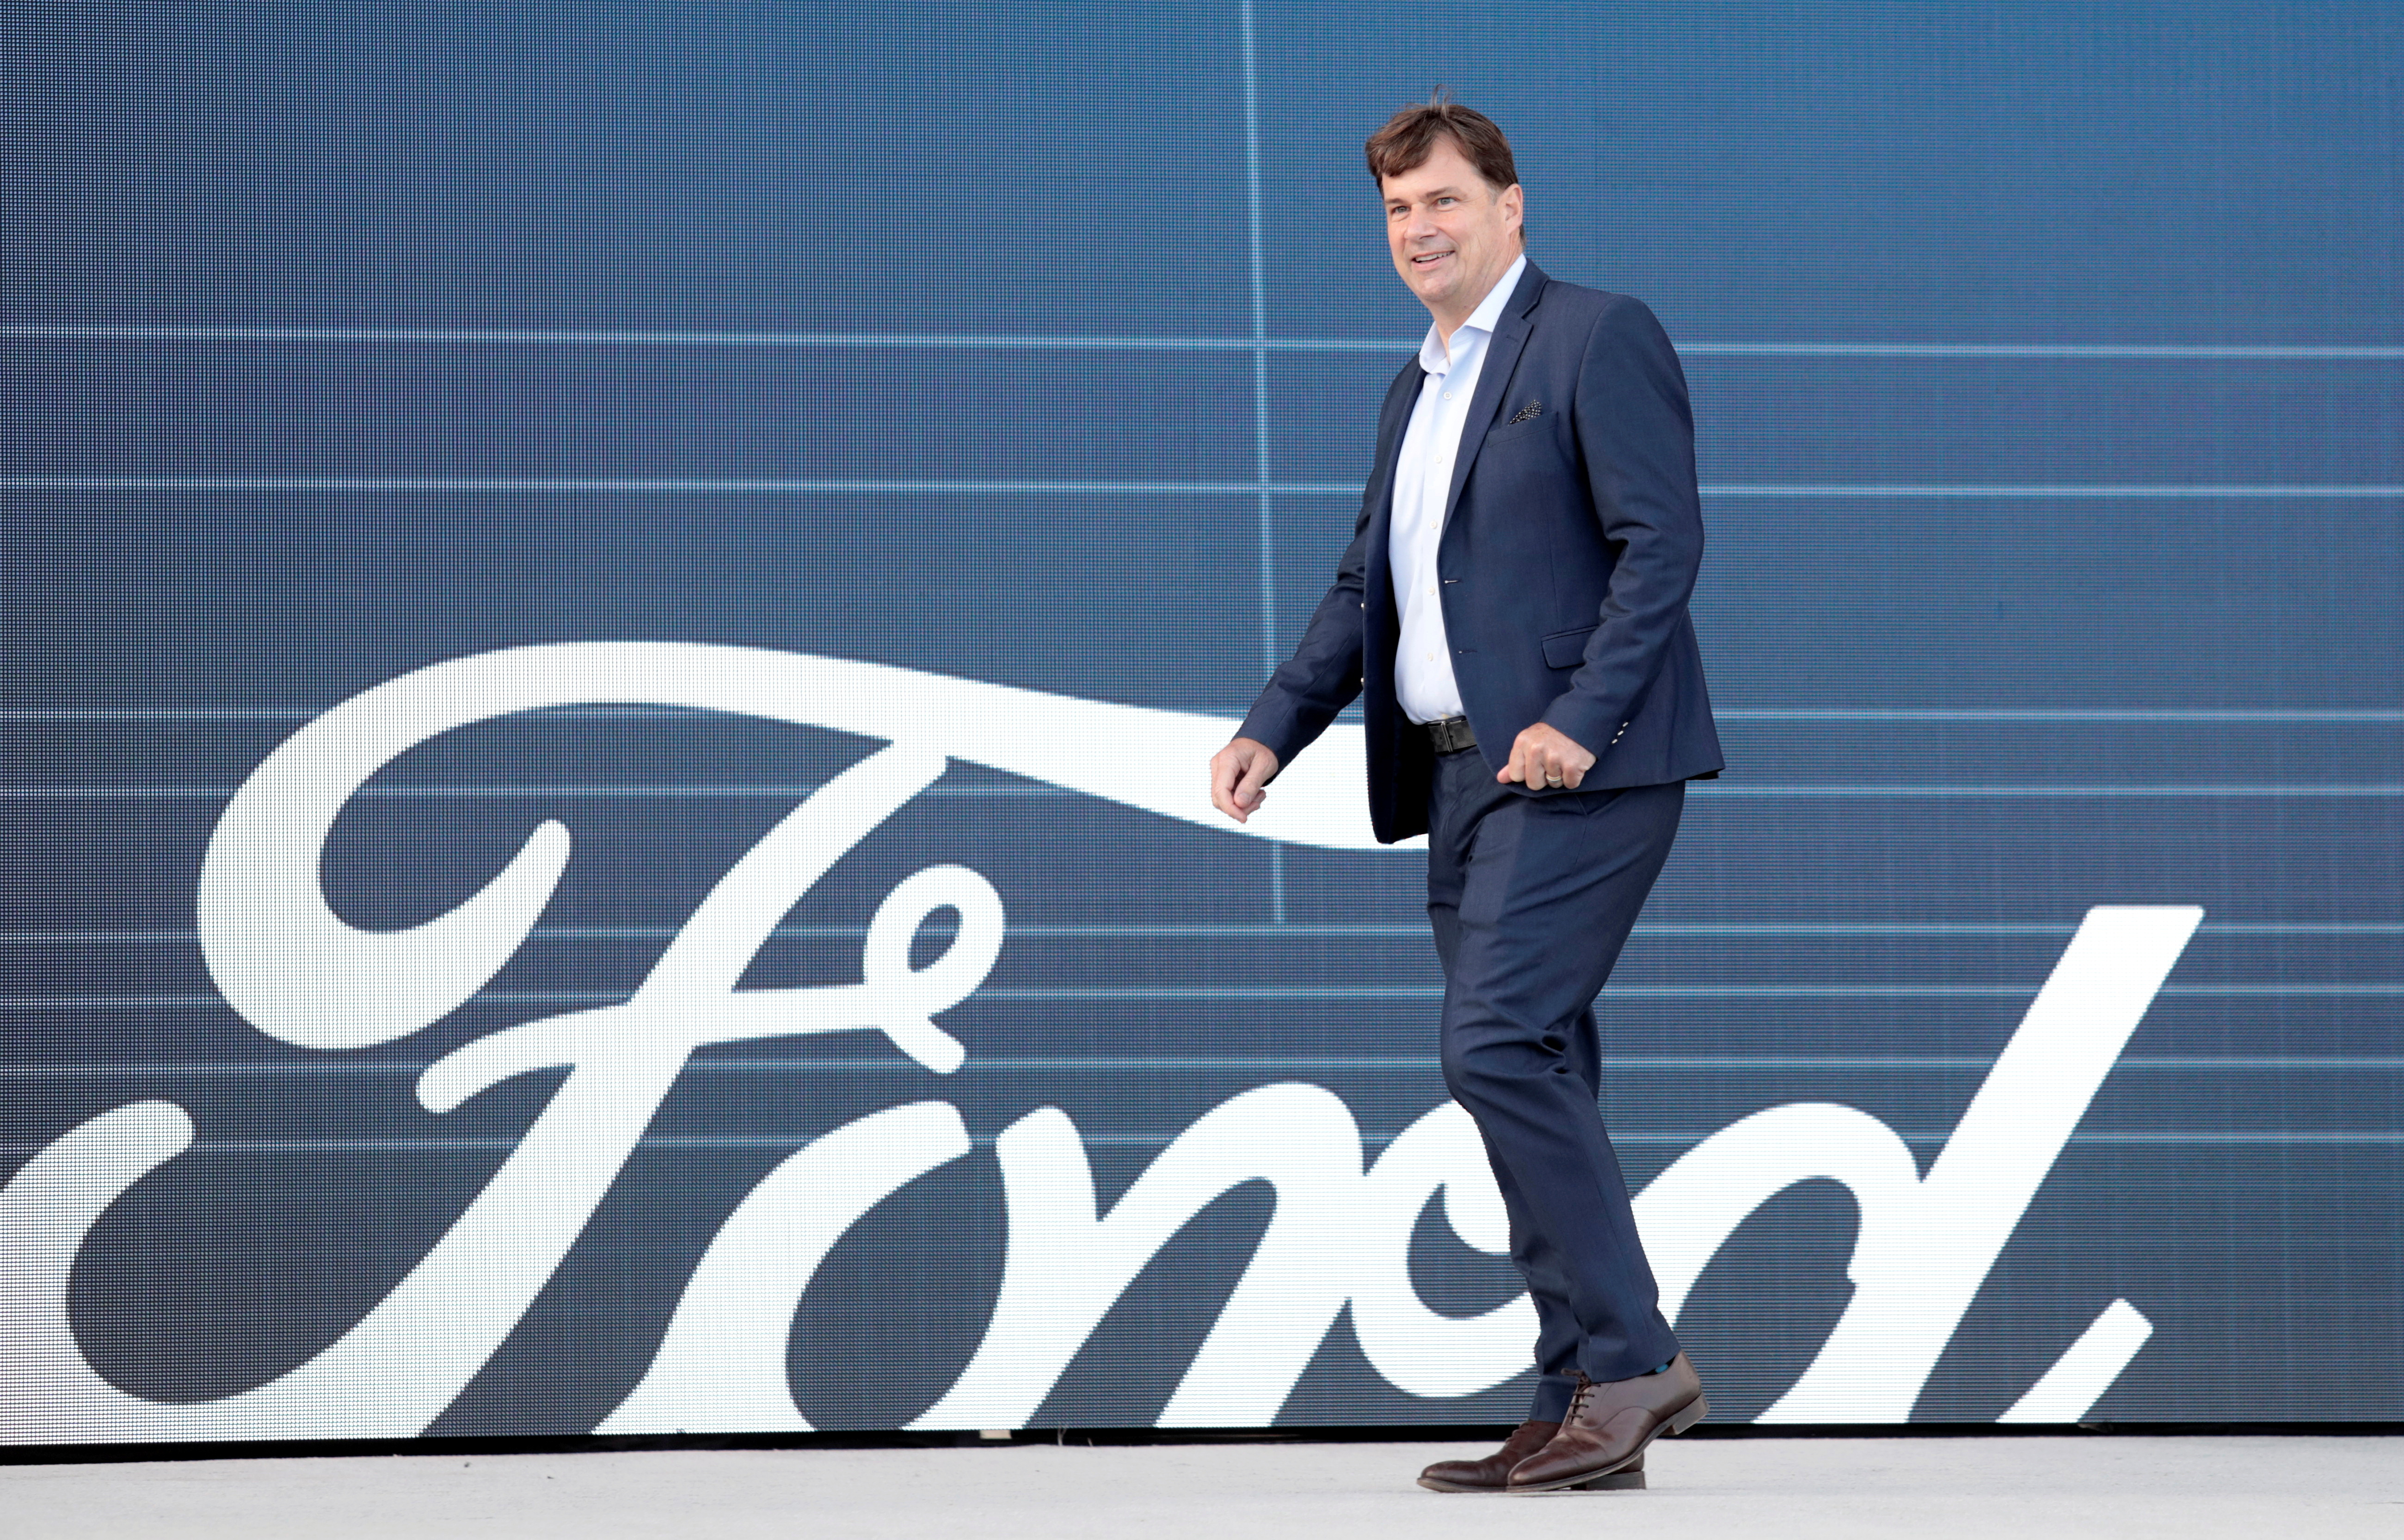 Ford Motor Co. CEO Jim Farley walks to speak at a news conference at the Rouge Complex in Dearborn, Michigan